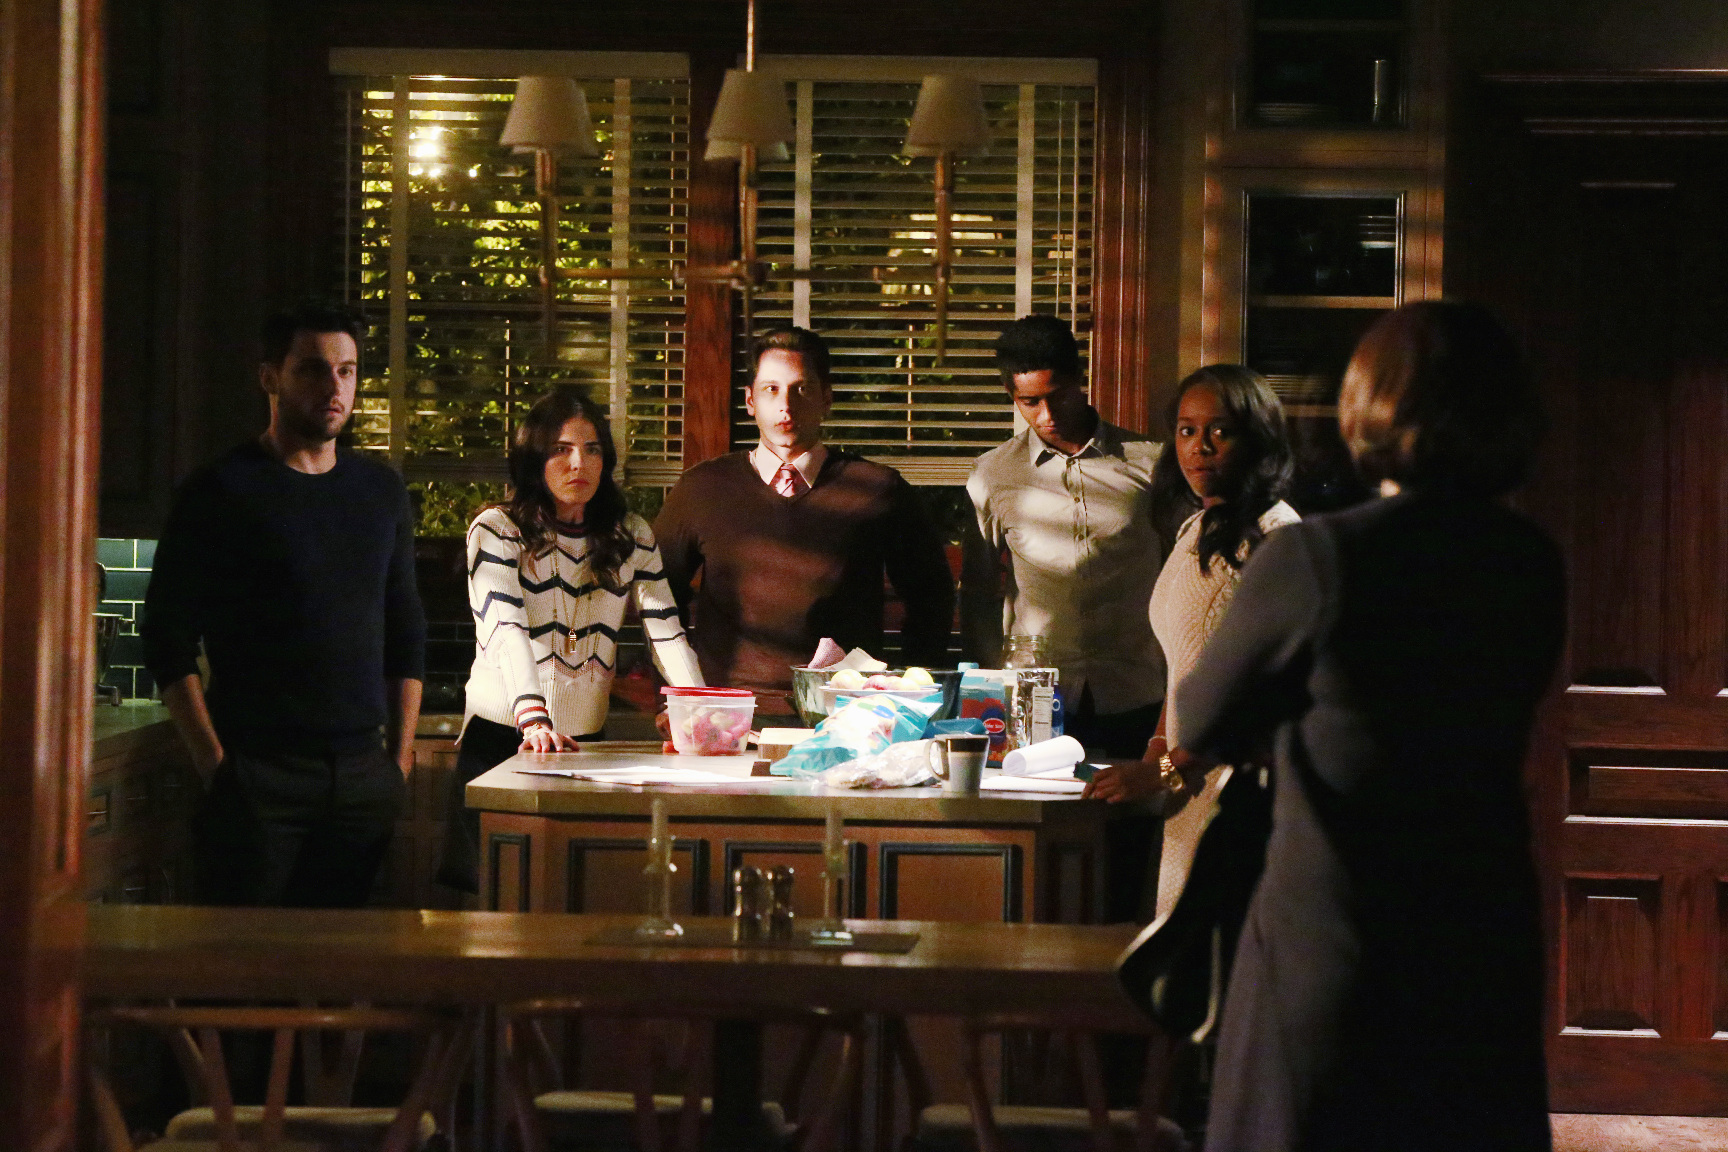 Still of Alfred Enoch, Karla Souza, Matt McGorry, Aja Naomi King and Jack Falahee in How to Get Away with Murder (2014)